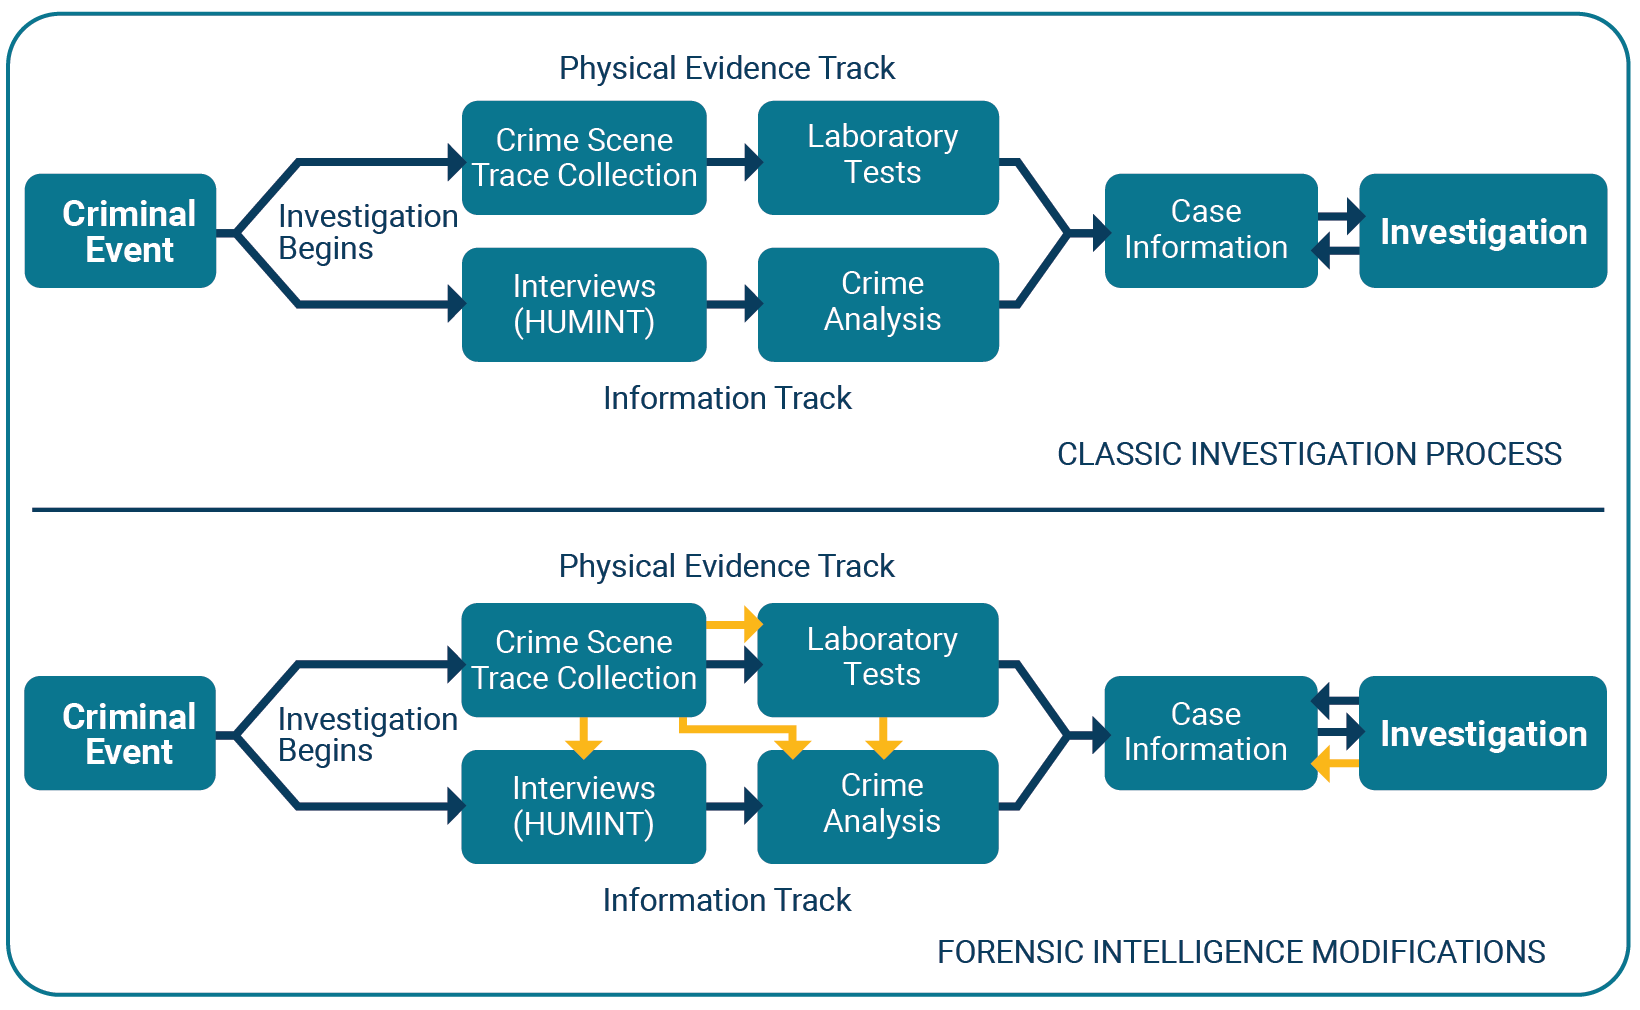 Forensic Intelligence in Practice